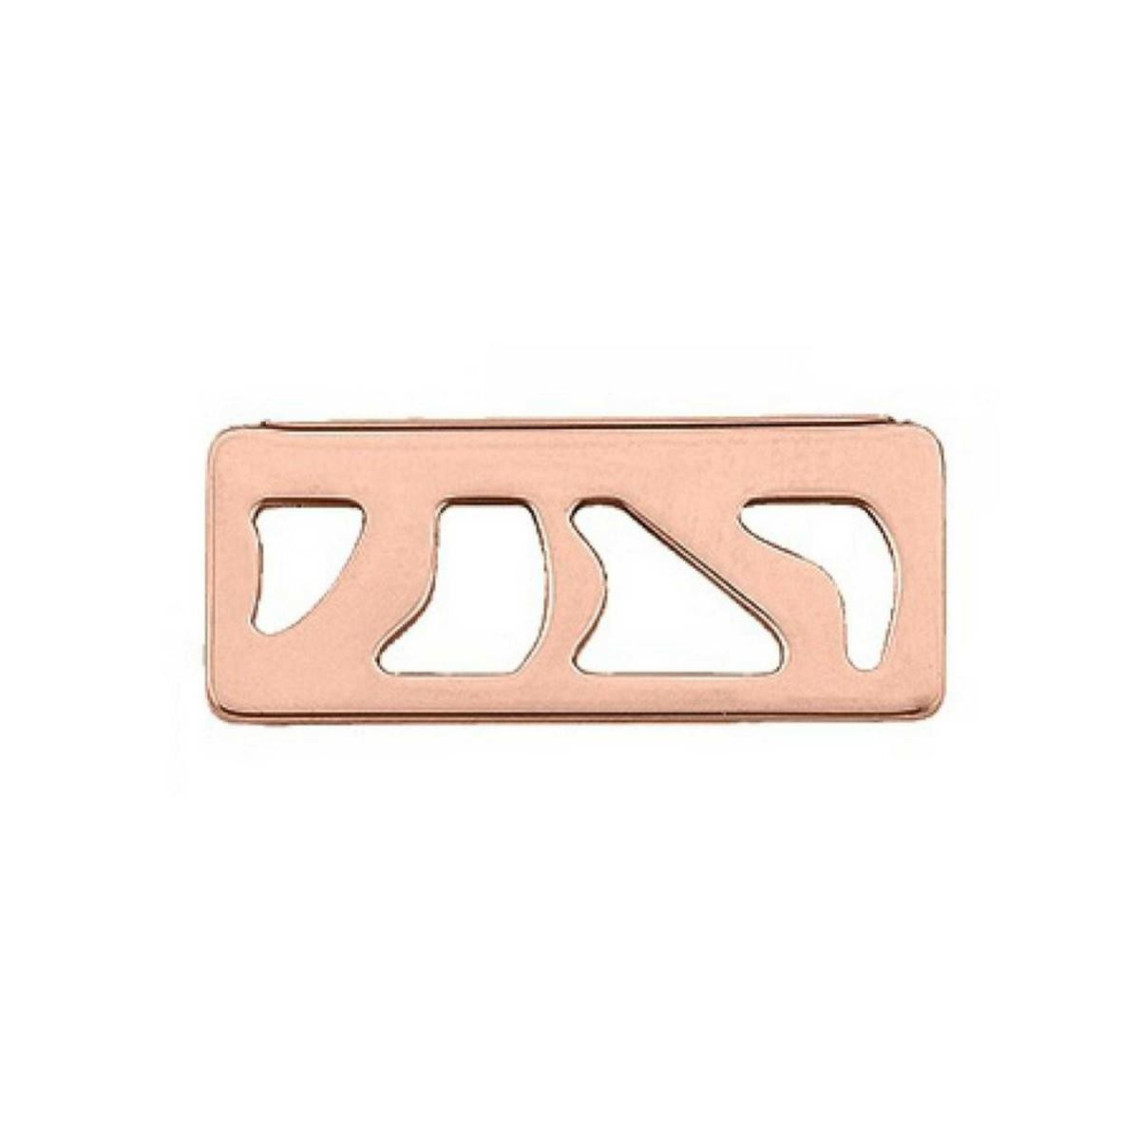 pendentif  perroquet laiton finition or rose rectangle 25 mm